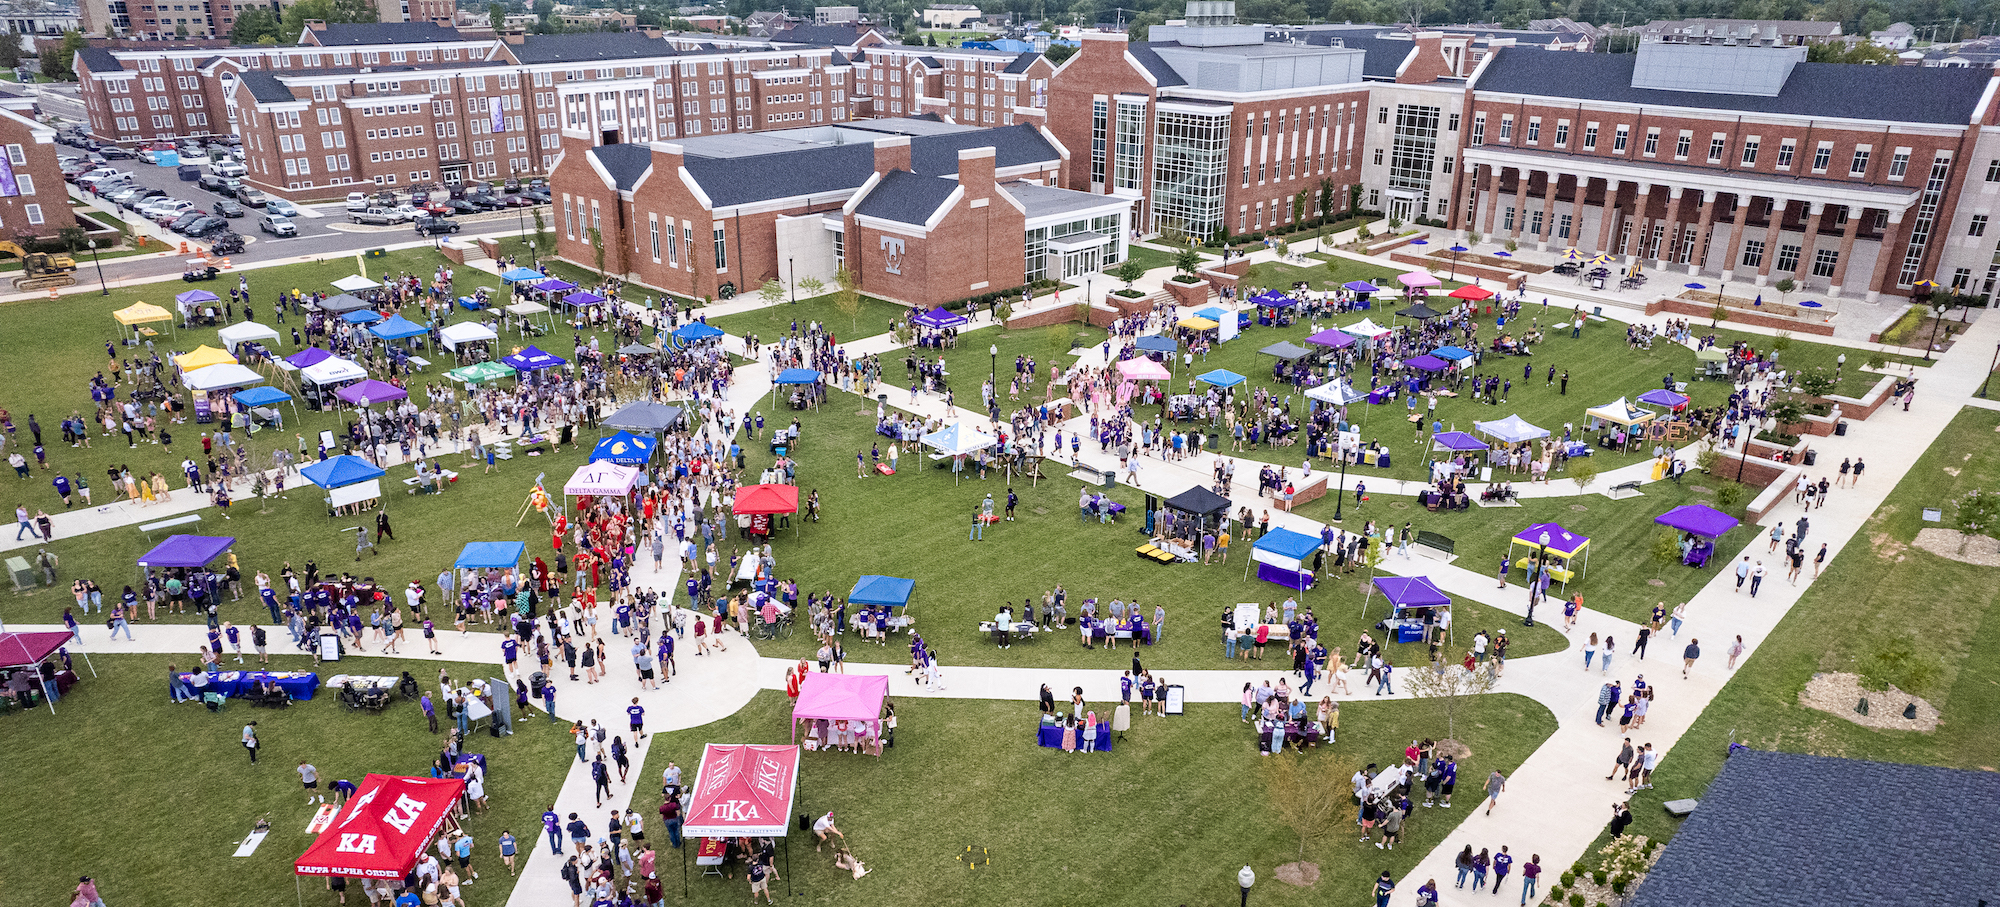 Mix and Mingle student organization event from a drone